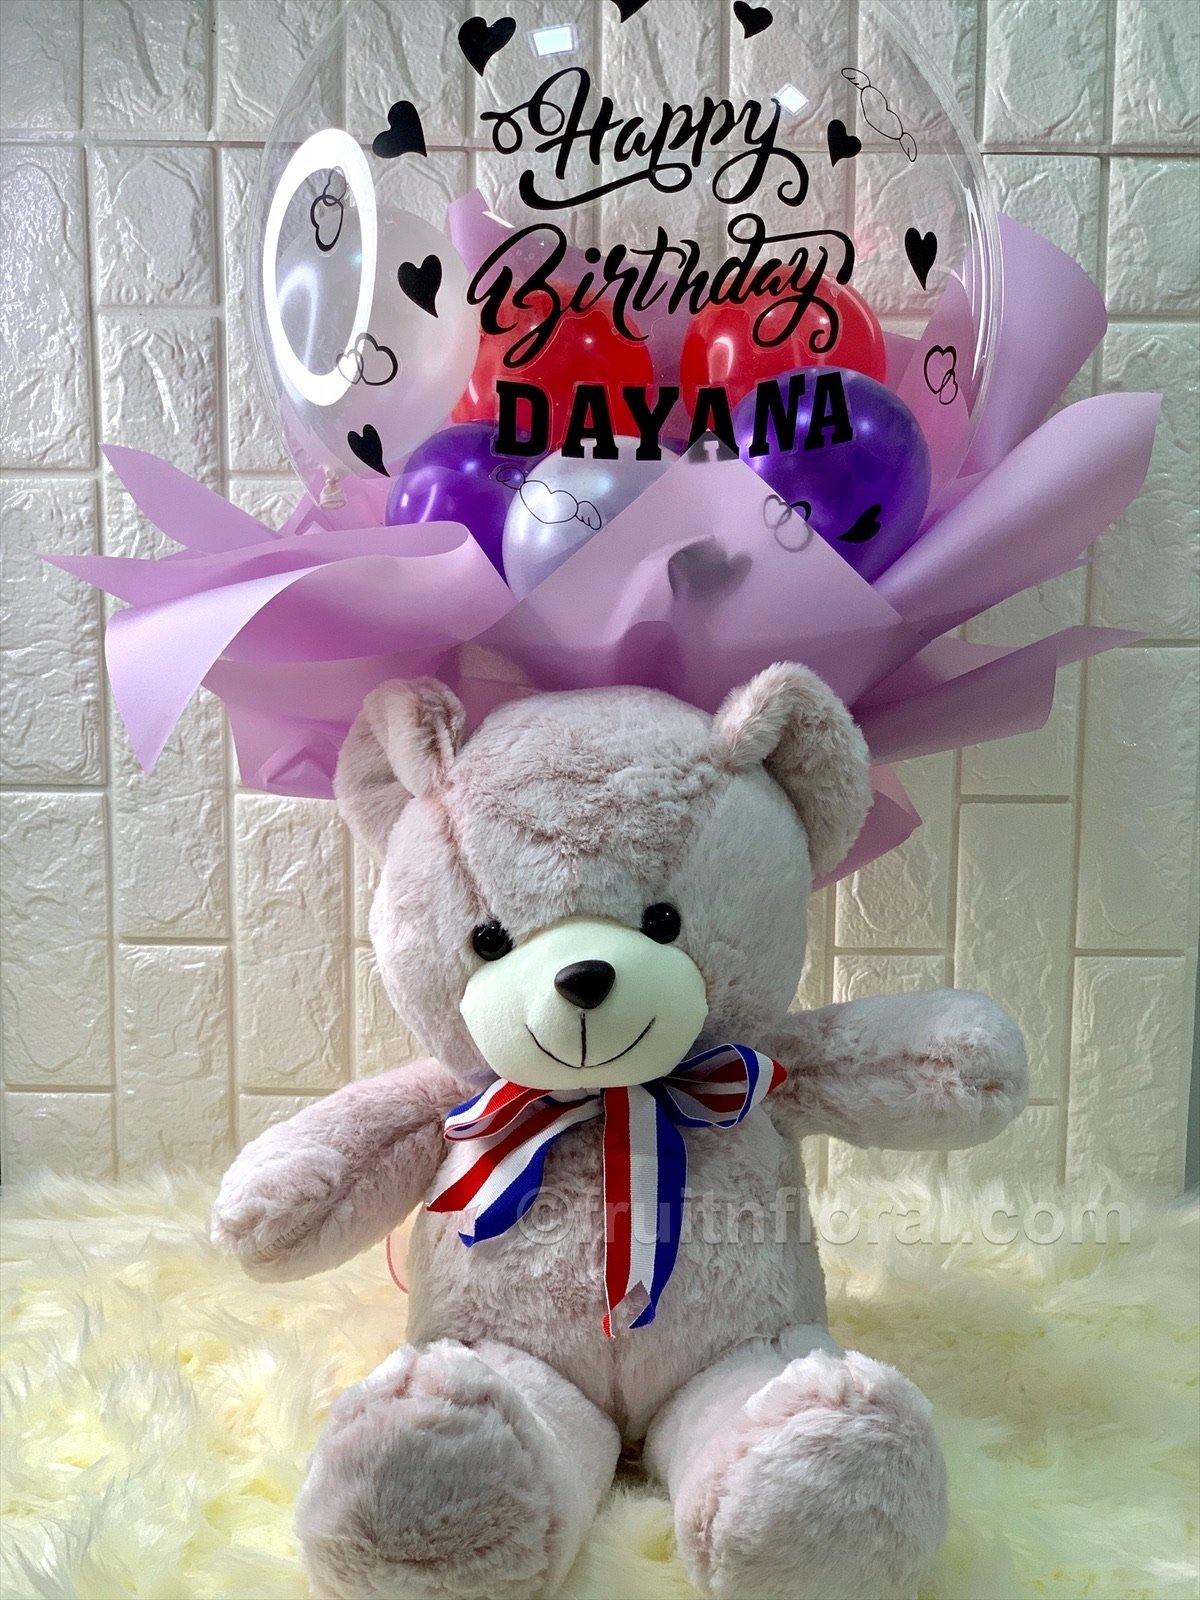 Birthday Balloon Bouquet with Bear and Choc - Fruit n Floral